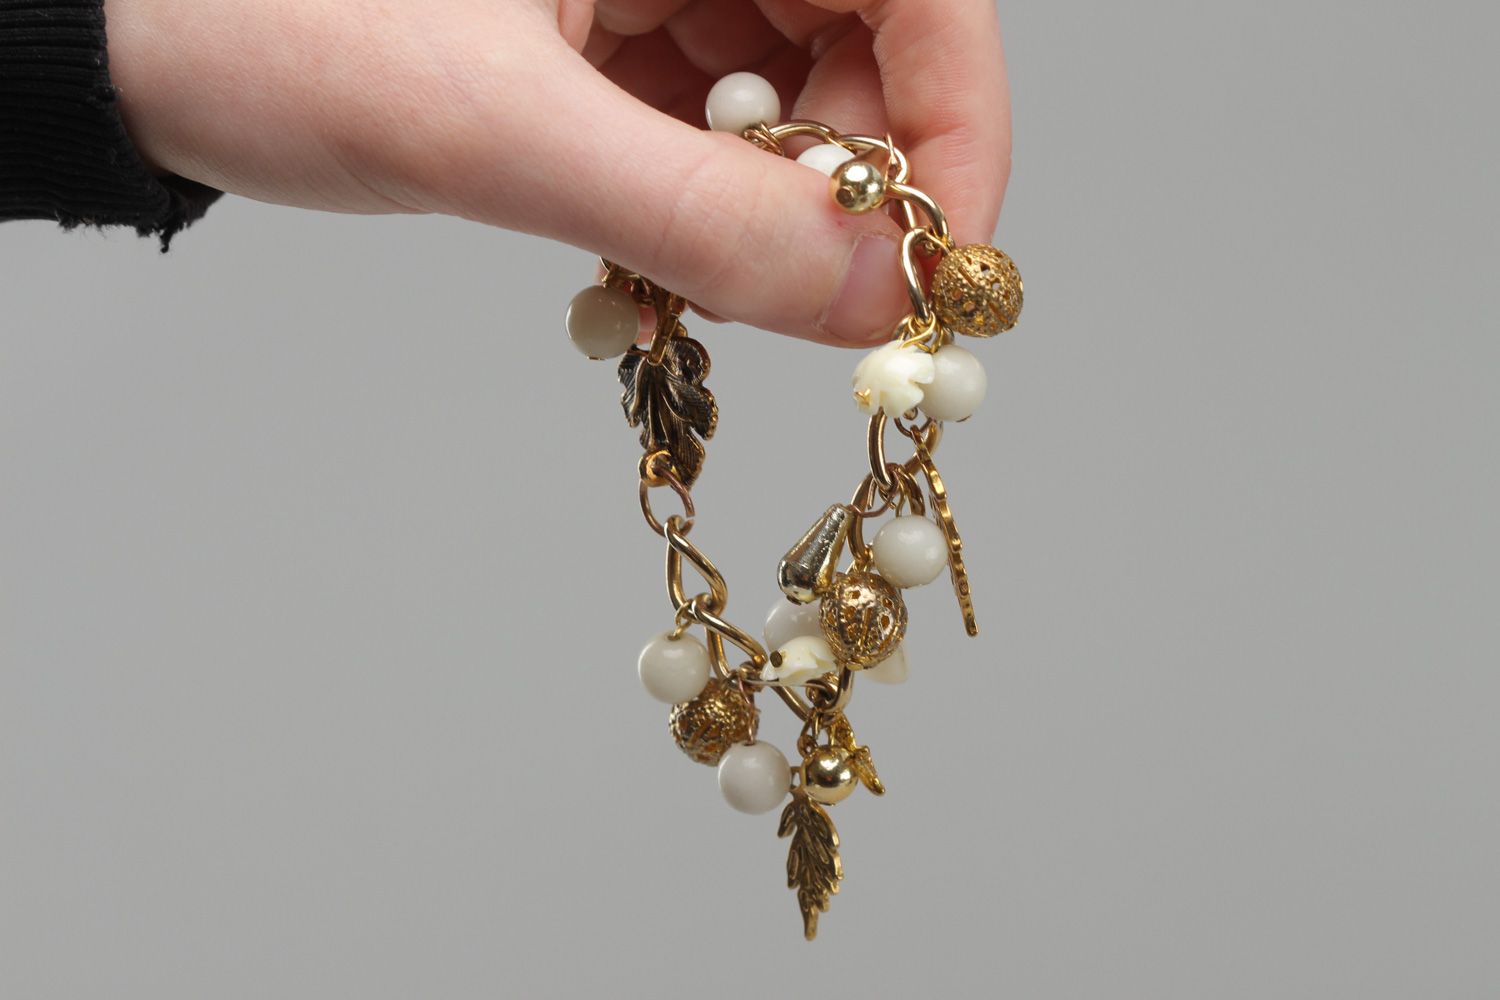 Handmade women's wrist bracelet with charms and beads of white and gold color photo 5